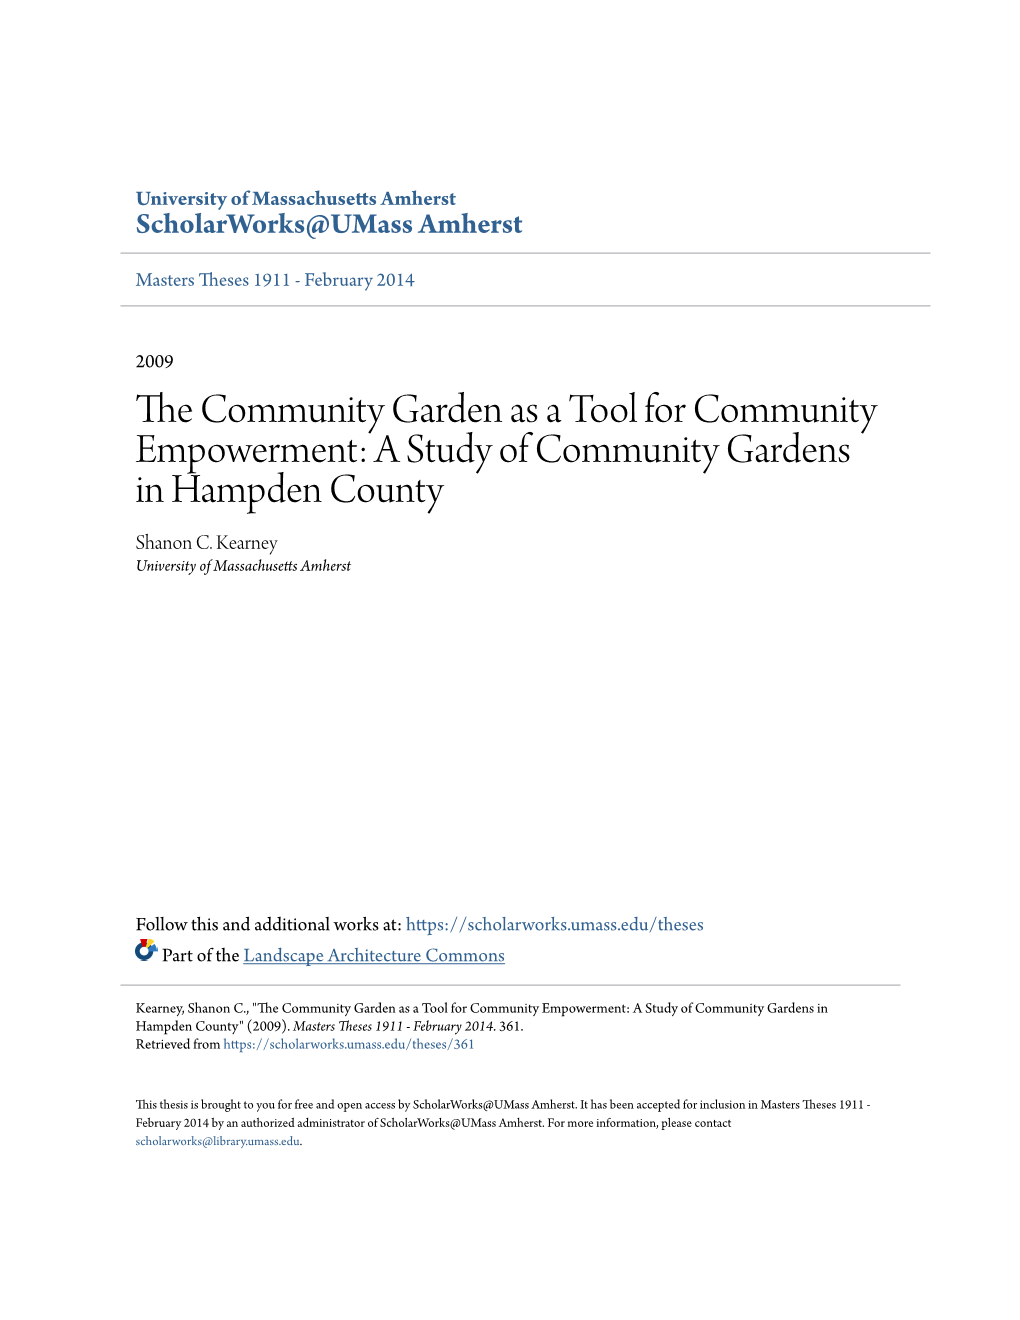 The Community Garden As a Tool for Community Empowerment: a Study of Community Gardens in Hampden County